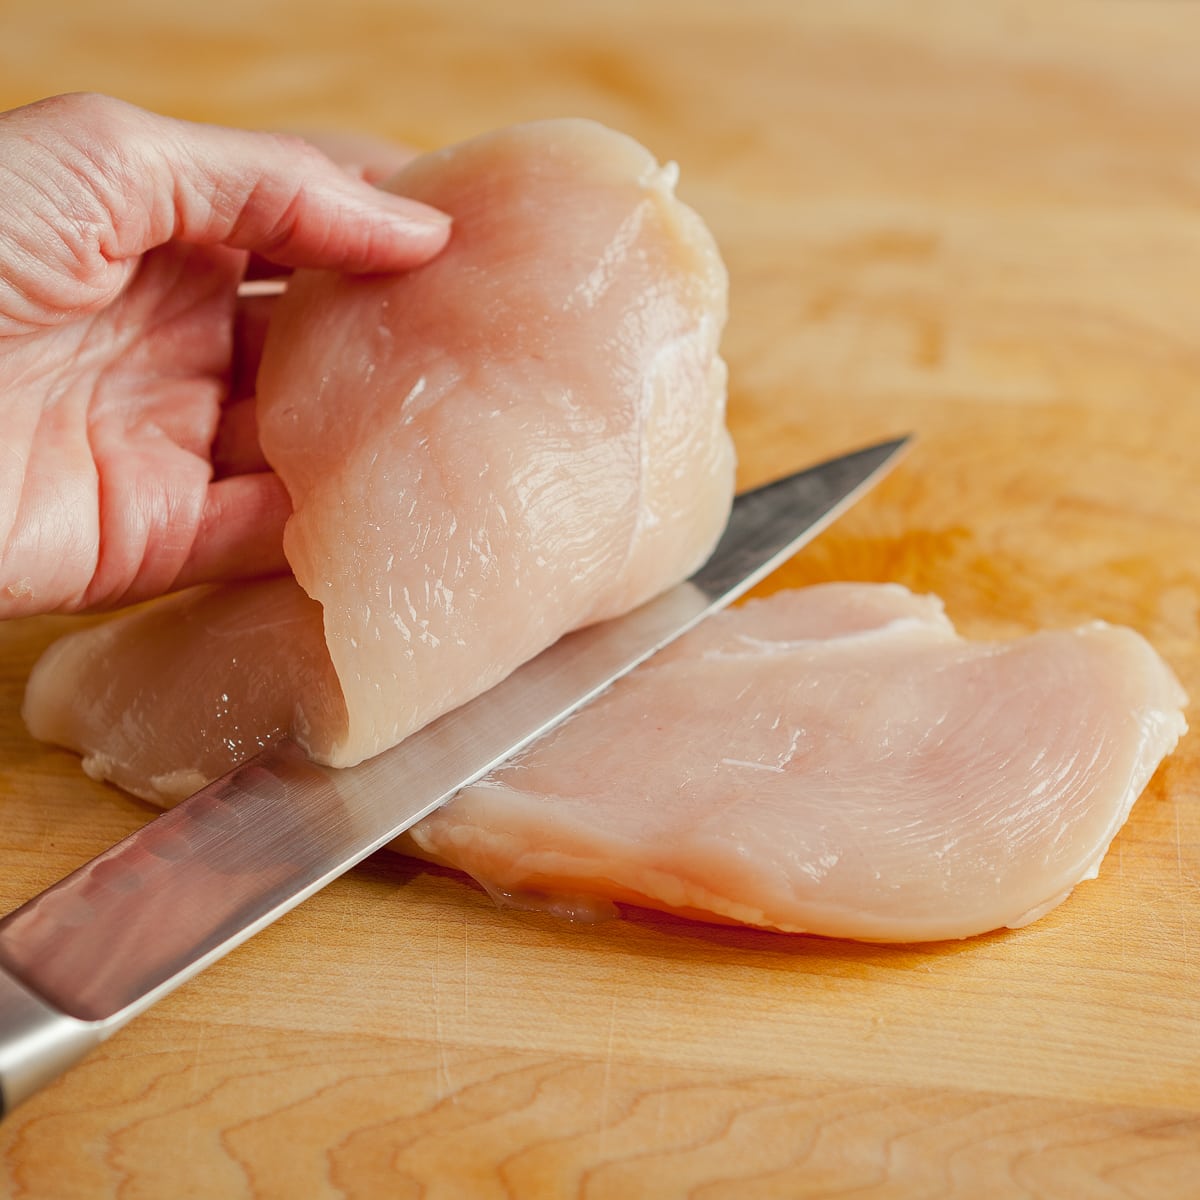 A chicken breast being sliced into half for a cutlet with a thin sharp knife.